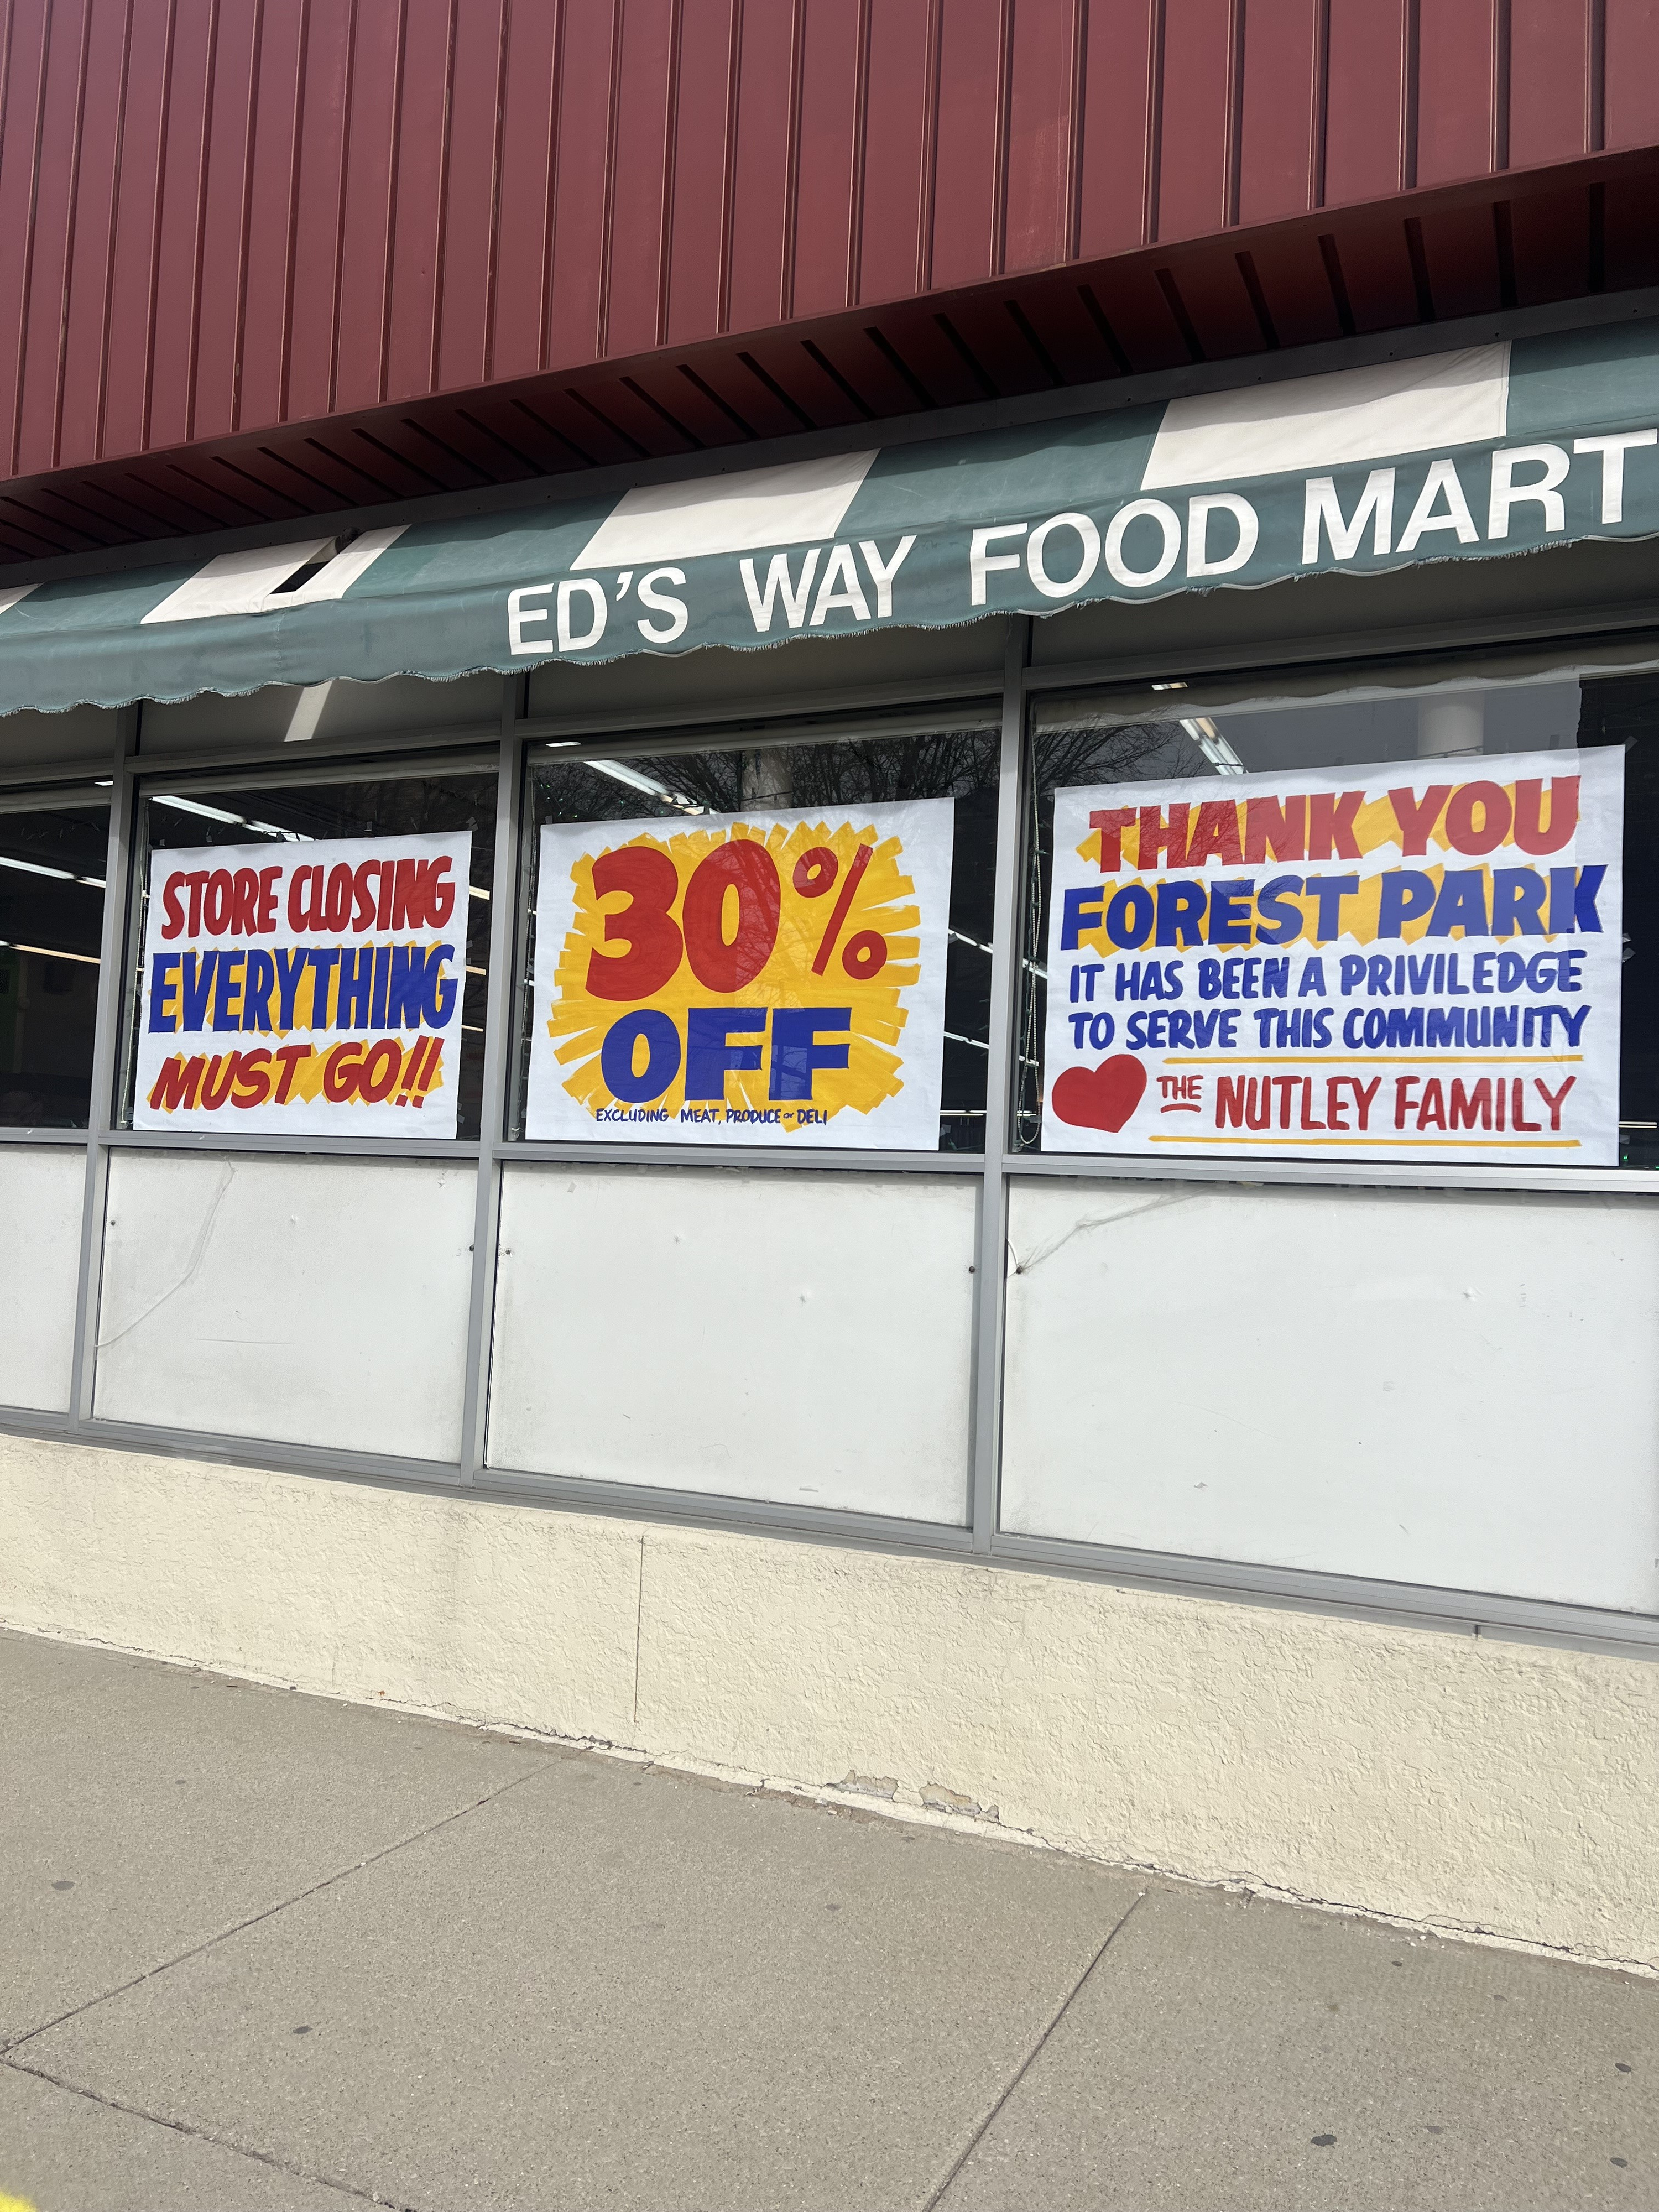 Ed's Way grocery store closing up shop